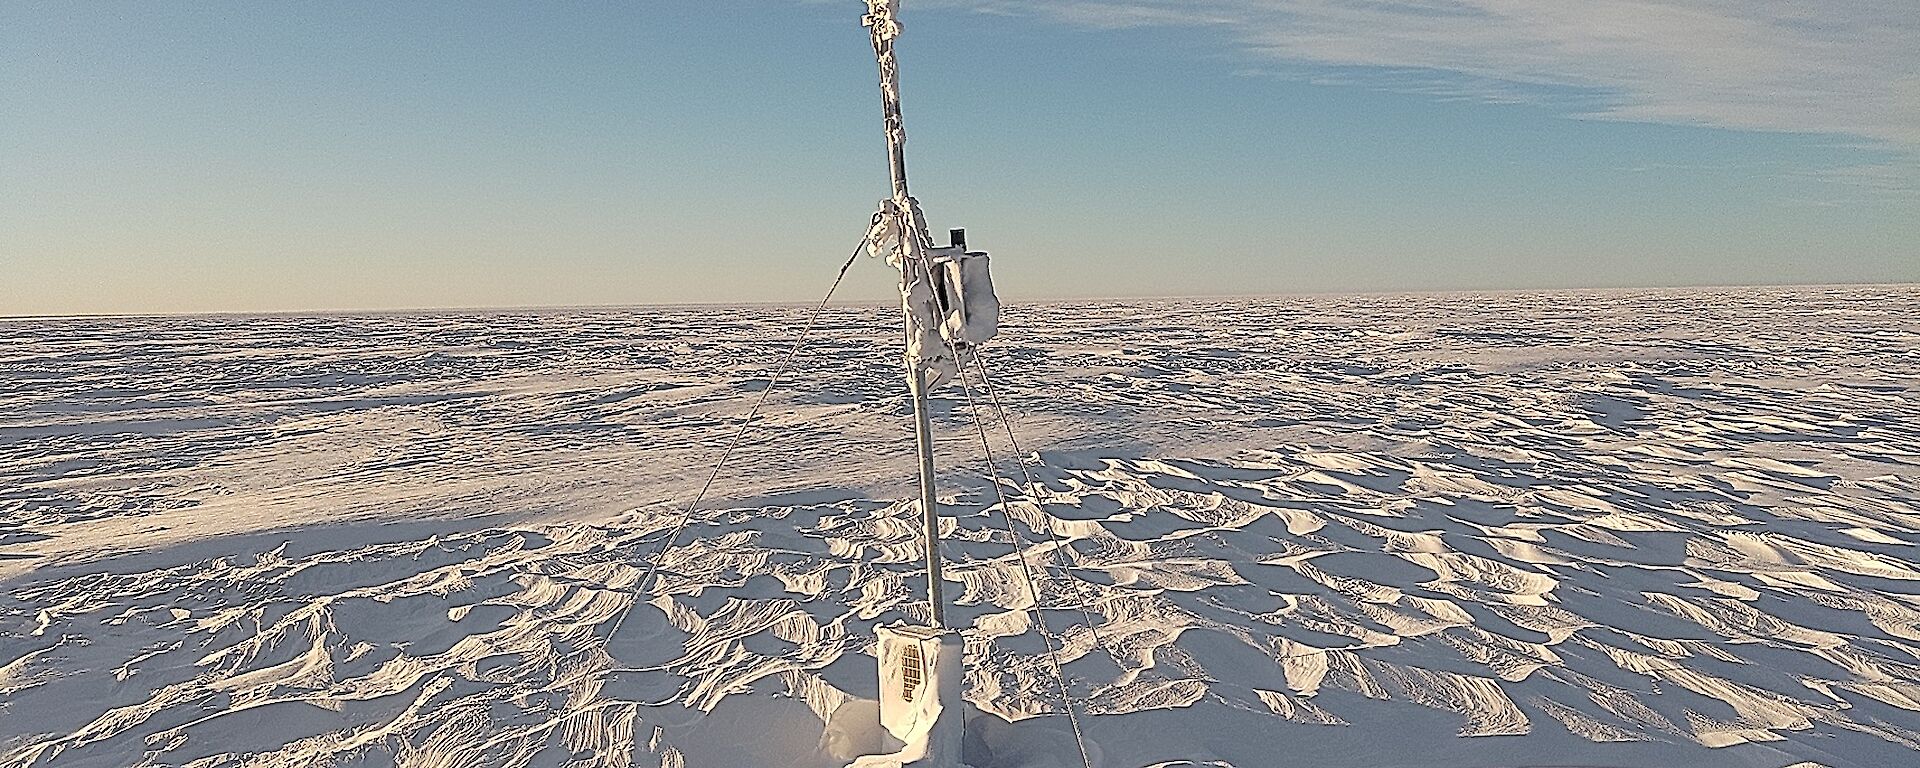 A wide plain covered with wind-rippled snow under a sky half-veiled with high cloud. A narrow mast with a wind vane and small propeller on top stands in the centre of the picture, apparently anchored to the ground with guy wires, but the base of the mast appears to be buried deep under the snow